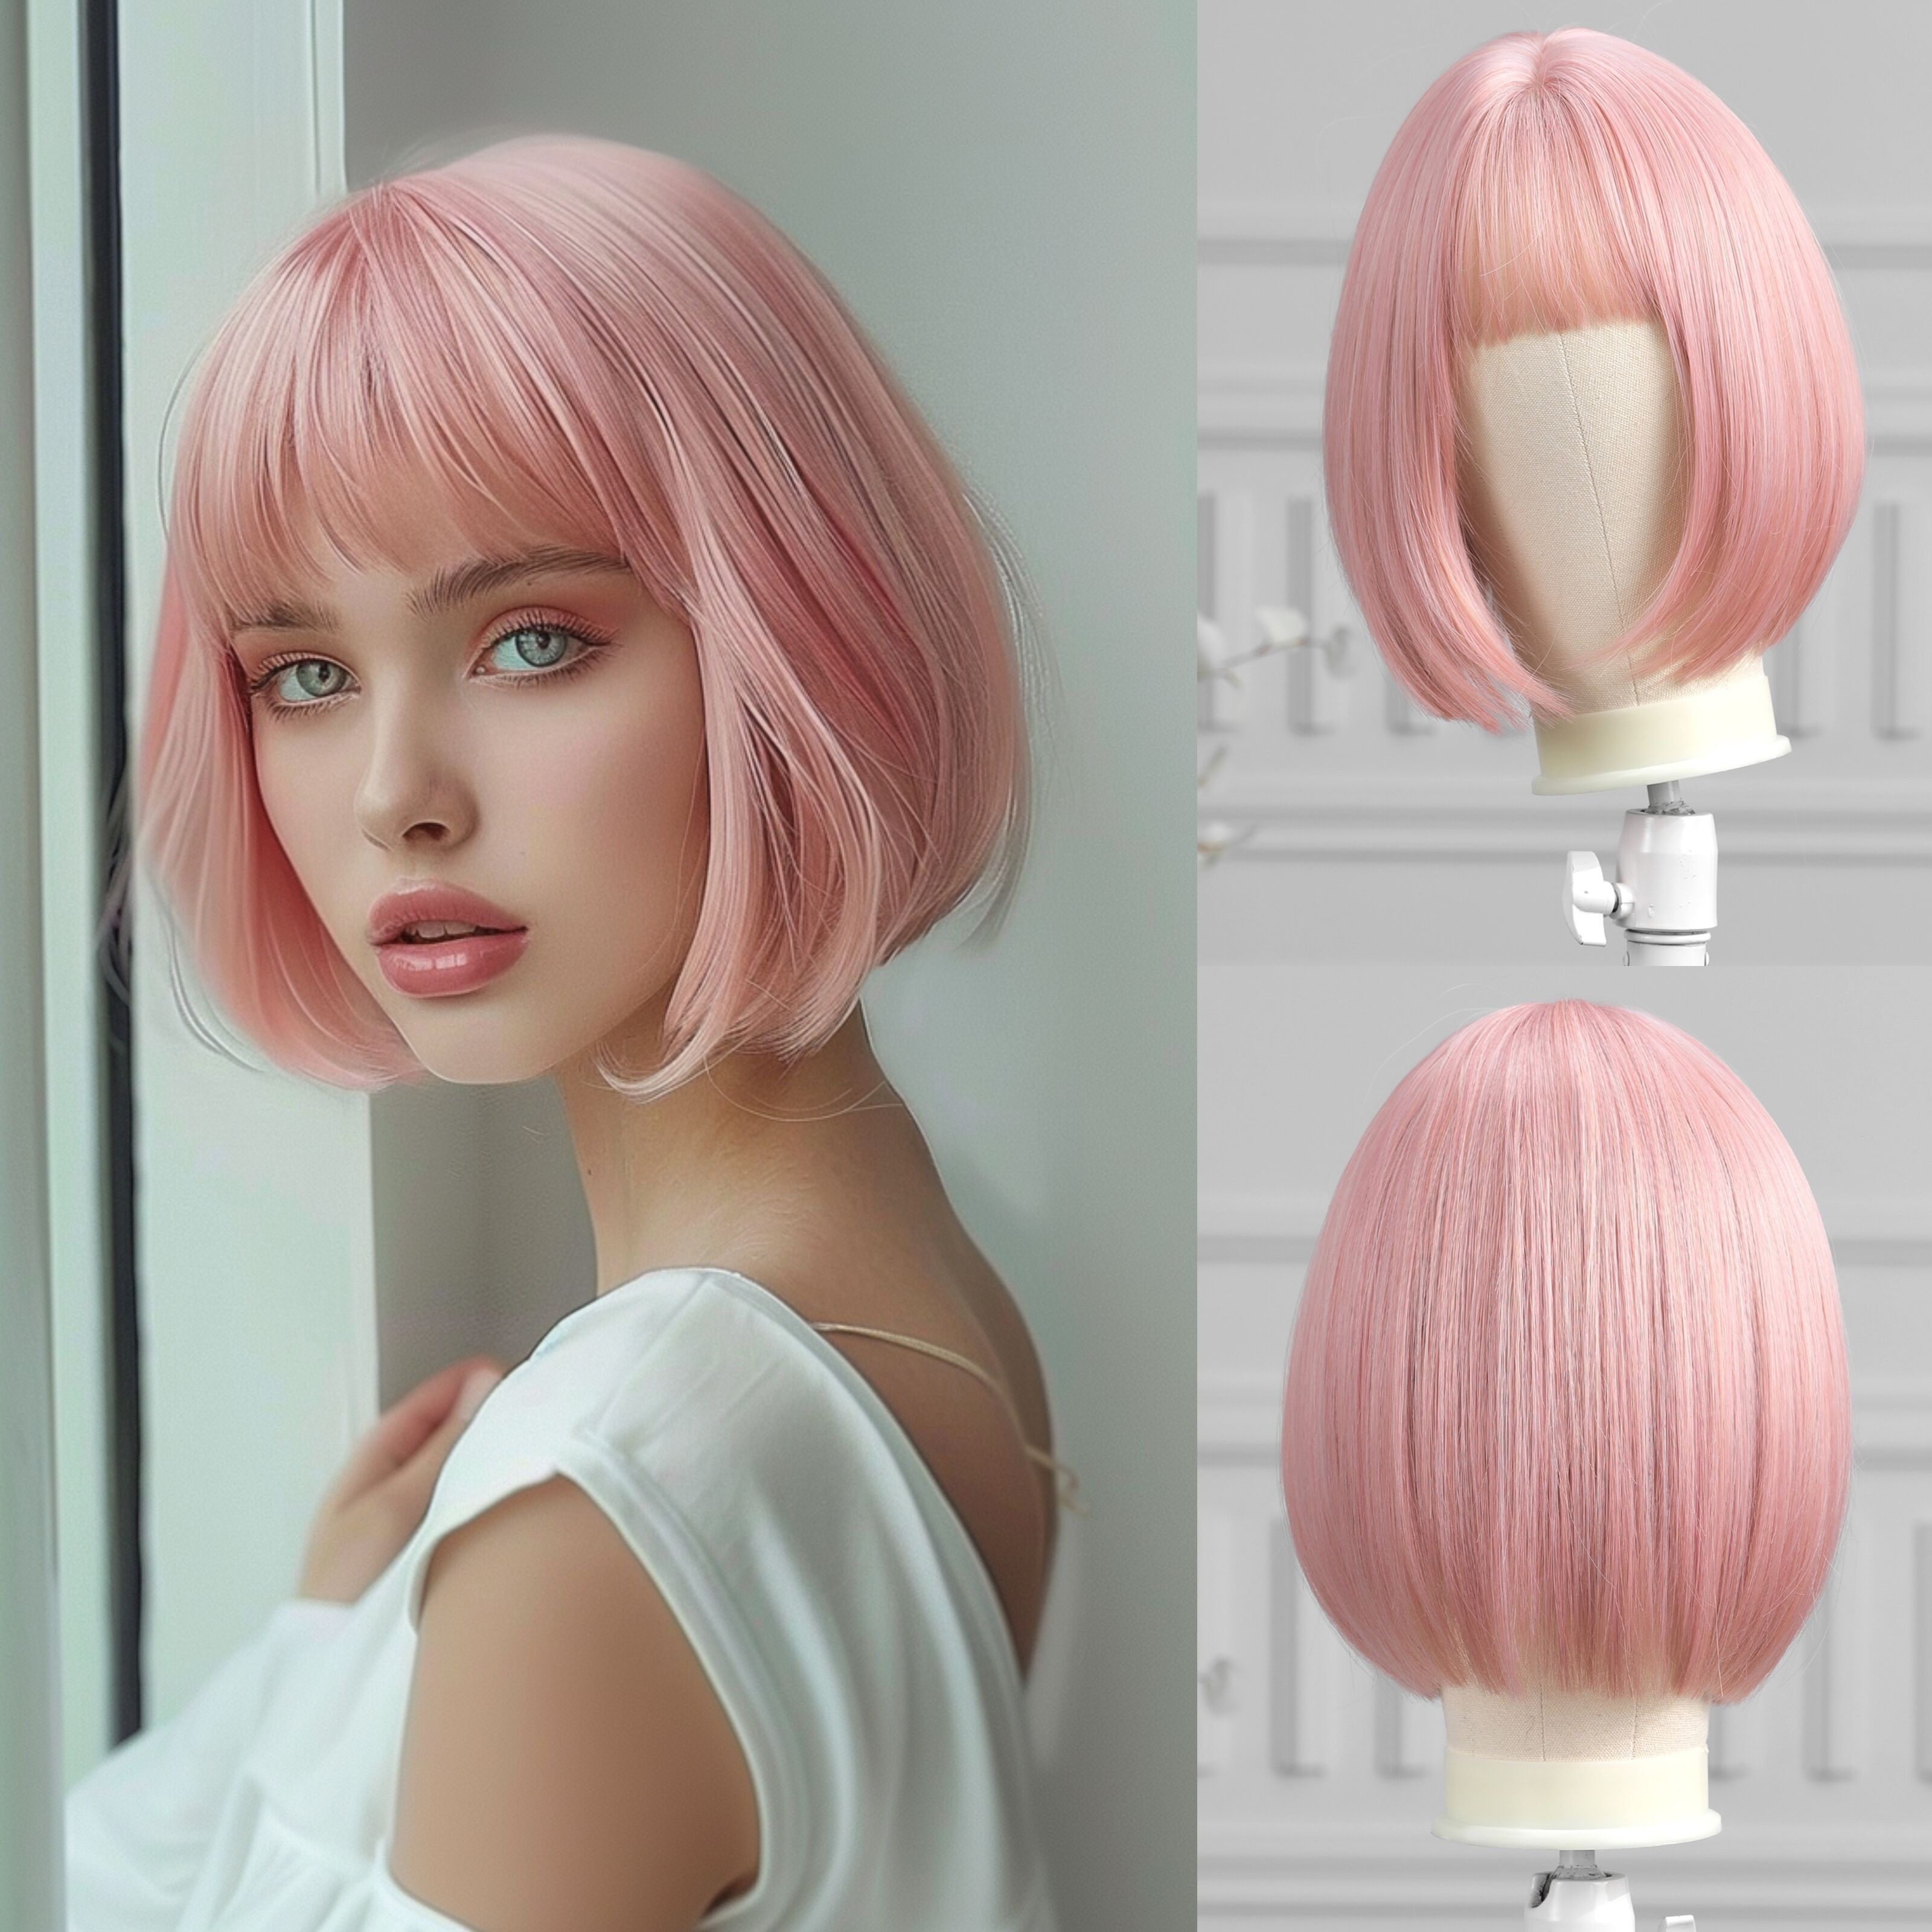 

Elegant Light Pink Bob Wig With Bangs For Women - 12 Inch, High-density Synthetic Hair, Perfect For Daily Wear & Parties Wigs For Women Short Wigs For Women